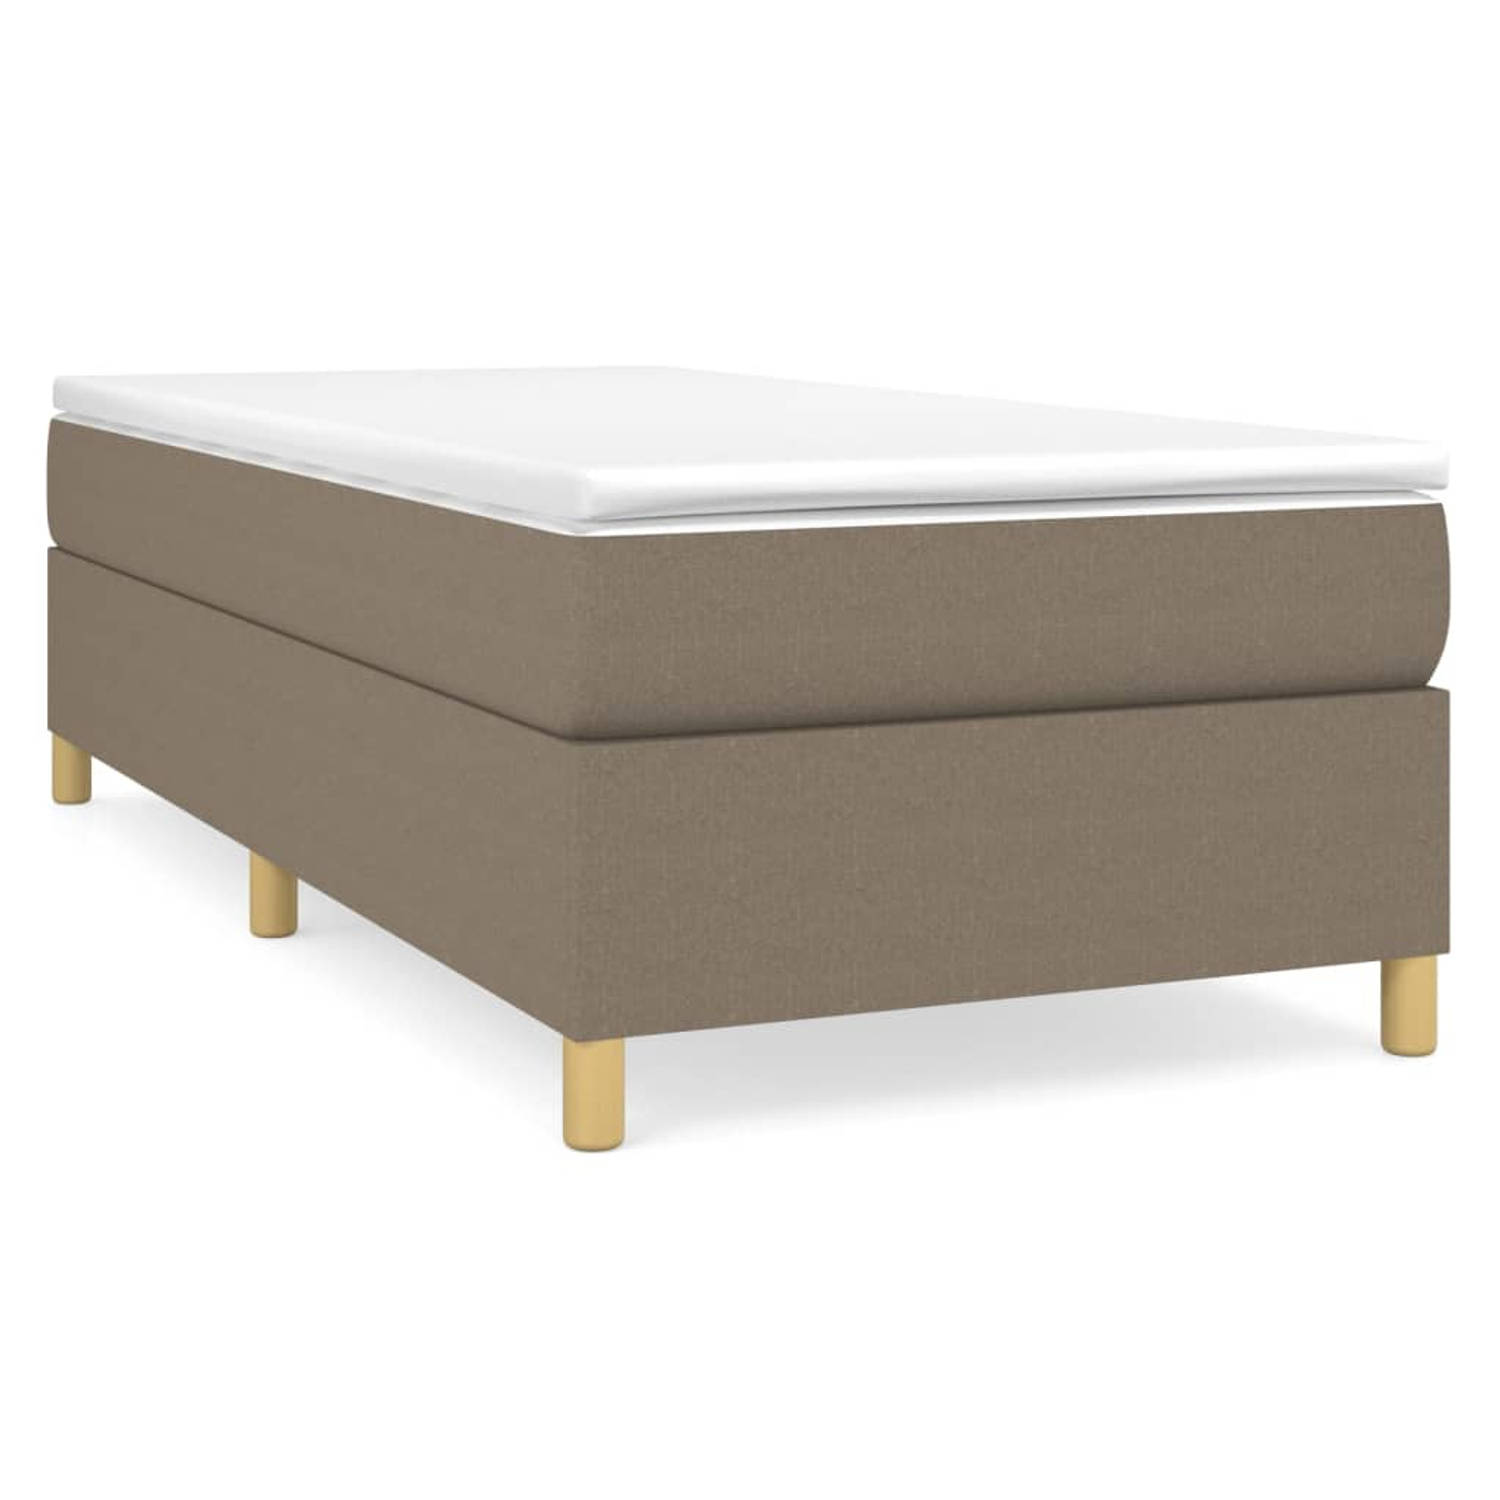 The Living Store Boxspring met matras stof taupe 90x200 cm - Boxspring - Boxsprings - Bed - Slaapmeubel - Boxspringbed - Boxspring Bed - Eenpersoonsbed - Bed Met Matras - Bedframe